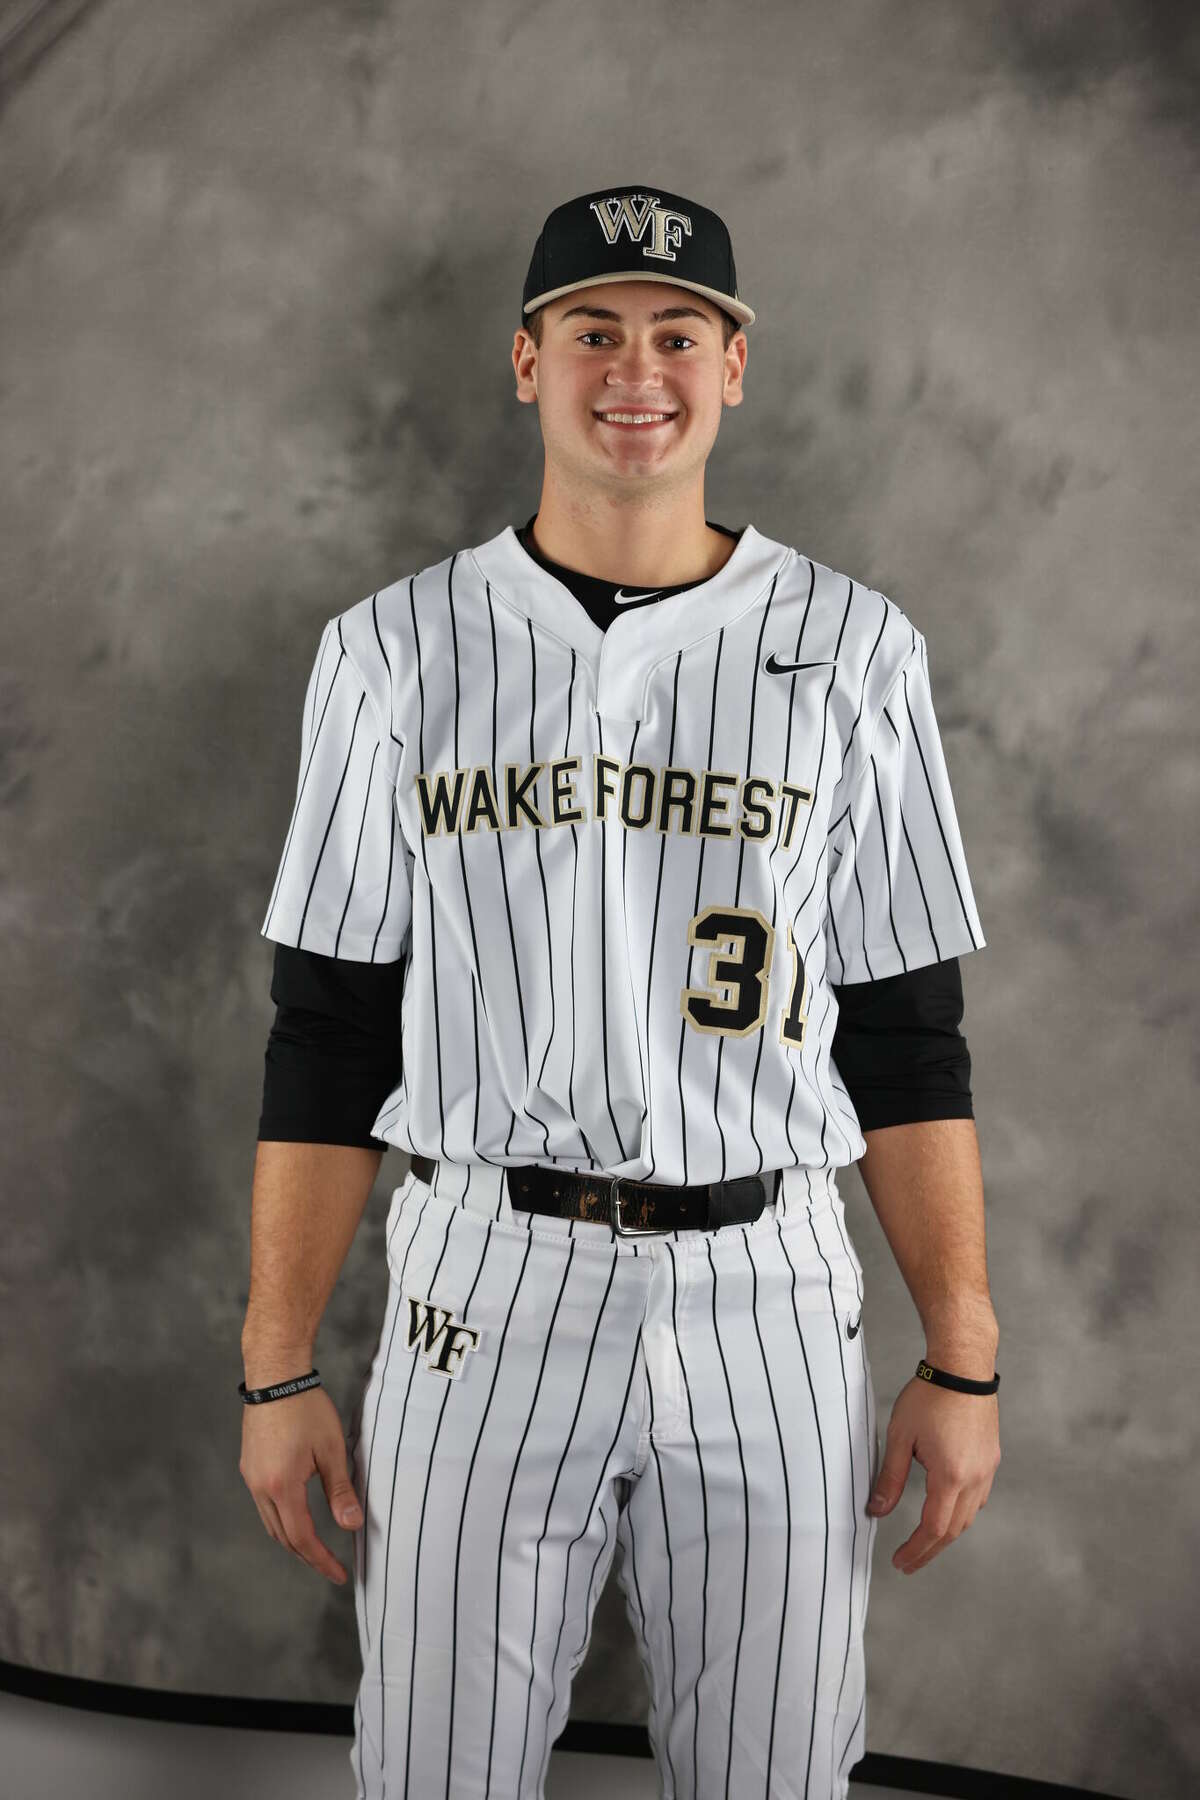 Jake Reinisch fulfilling his role with Wake Forest baseball